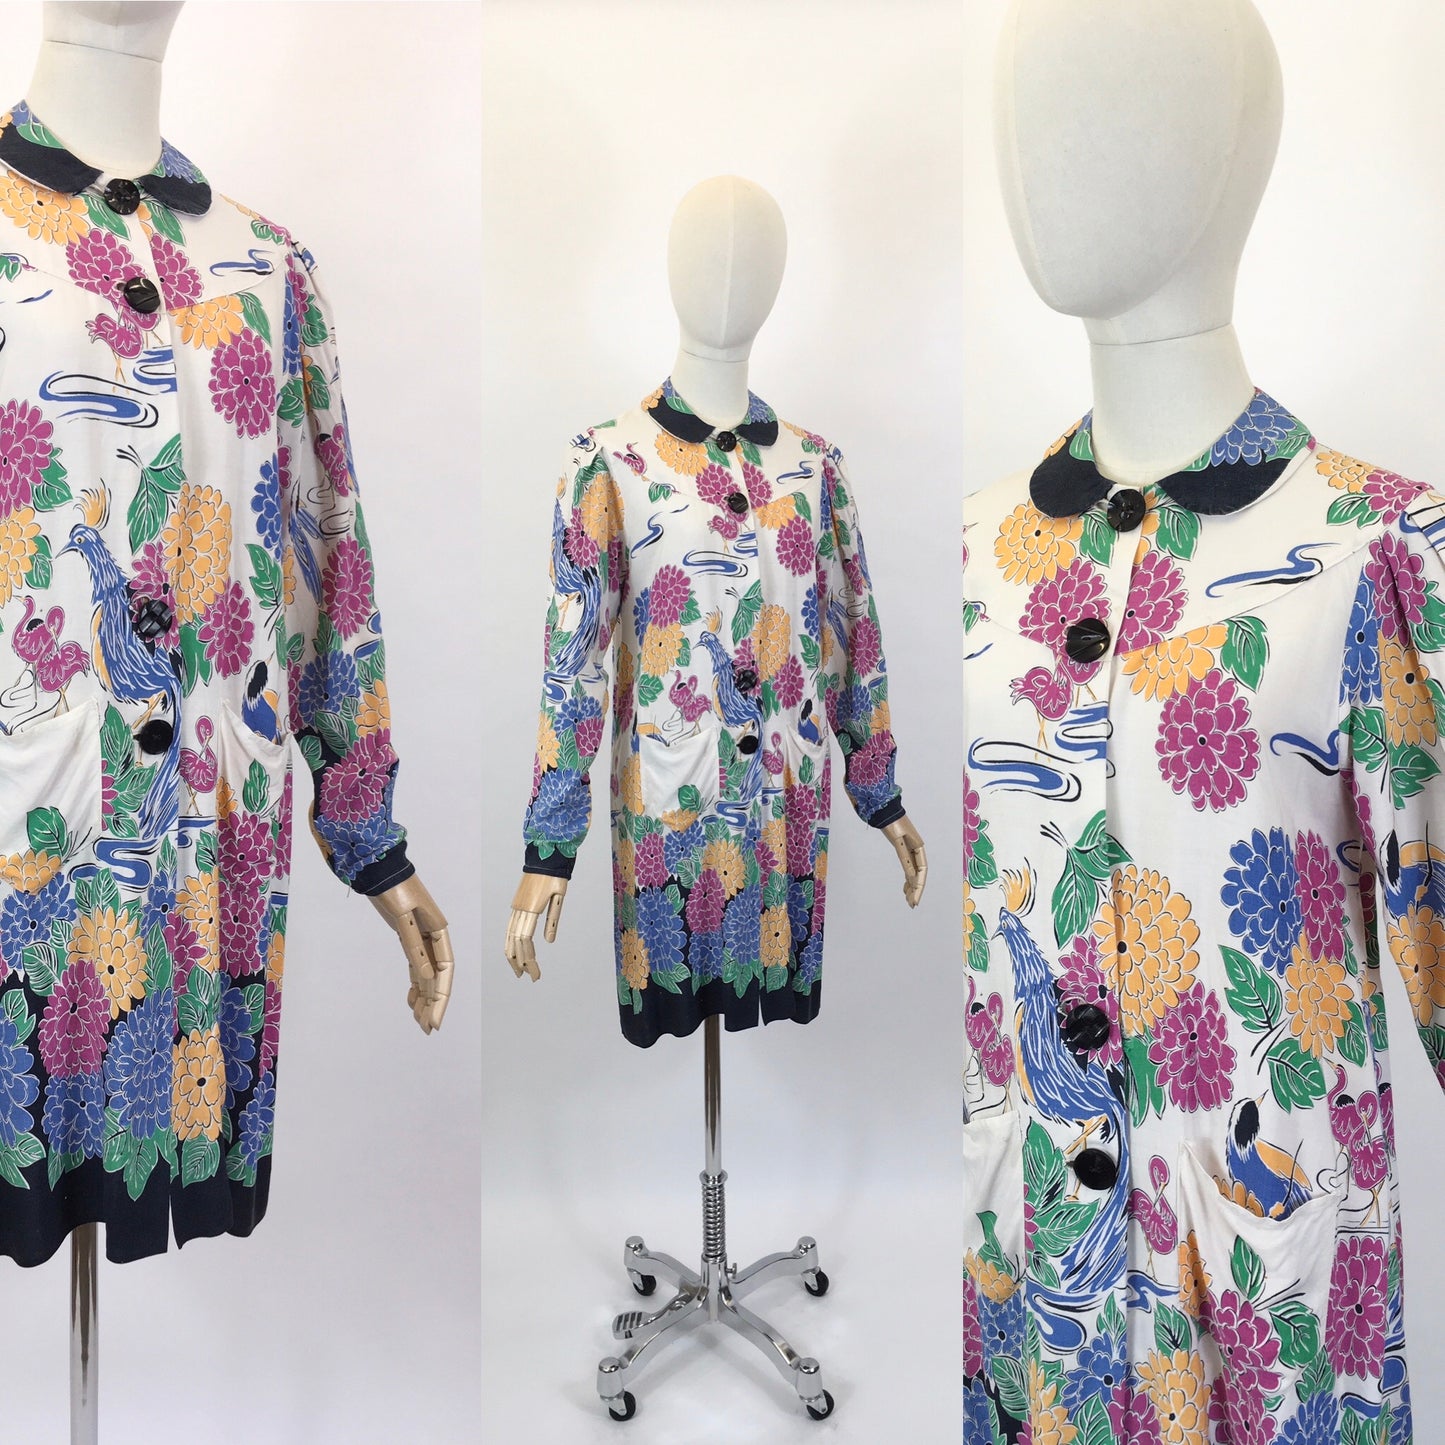 Original 1940’s SENSATIONAL Smock - With Amazing Print in Bold Bright Colours